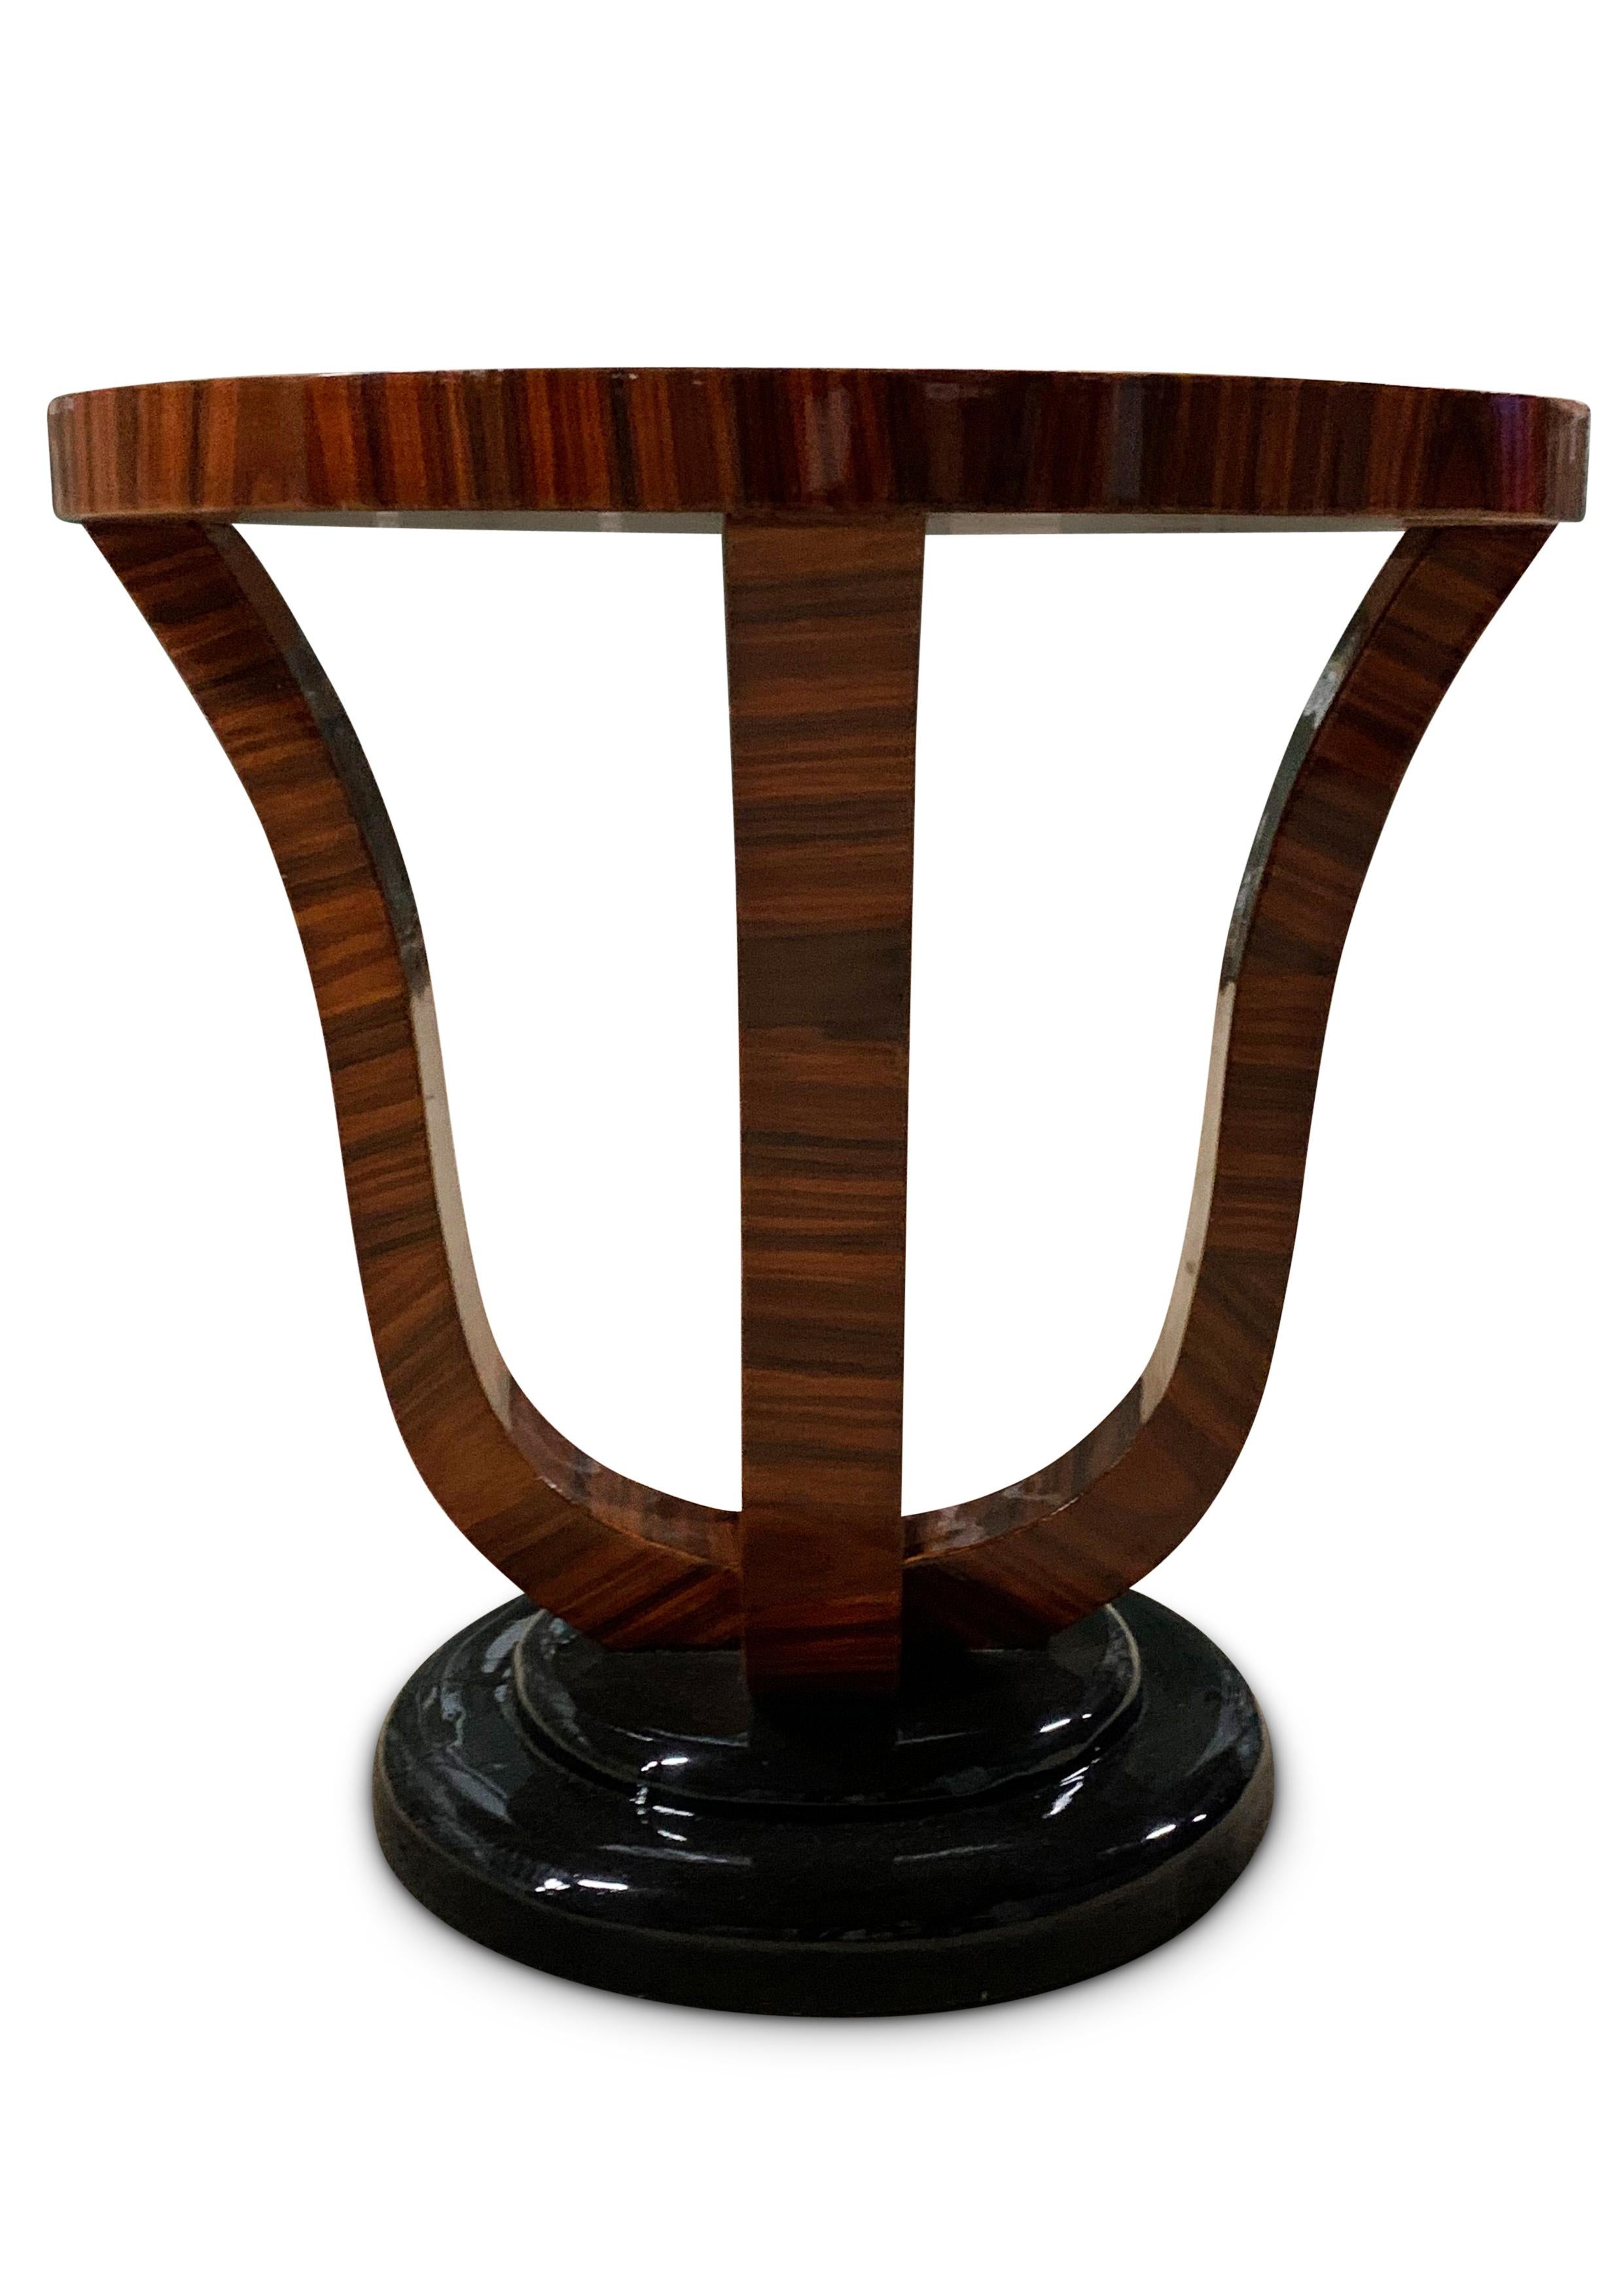 Jules Leleu Style Art Deco Pedestal Table With A Beautiful Rosewood Sunburst Top In Good Condition For Sale In High Wycombe, GB